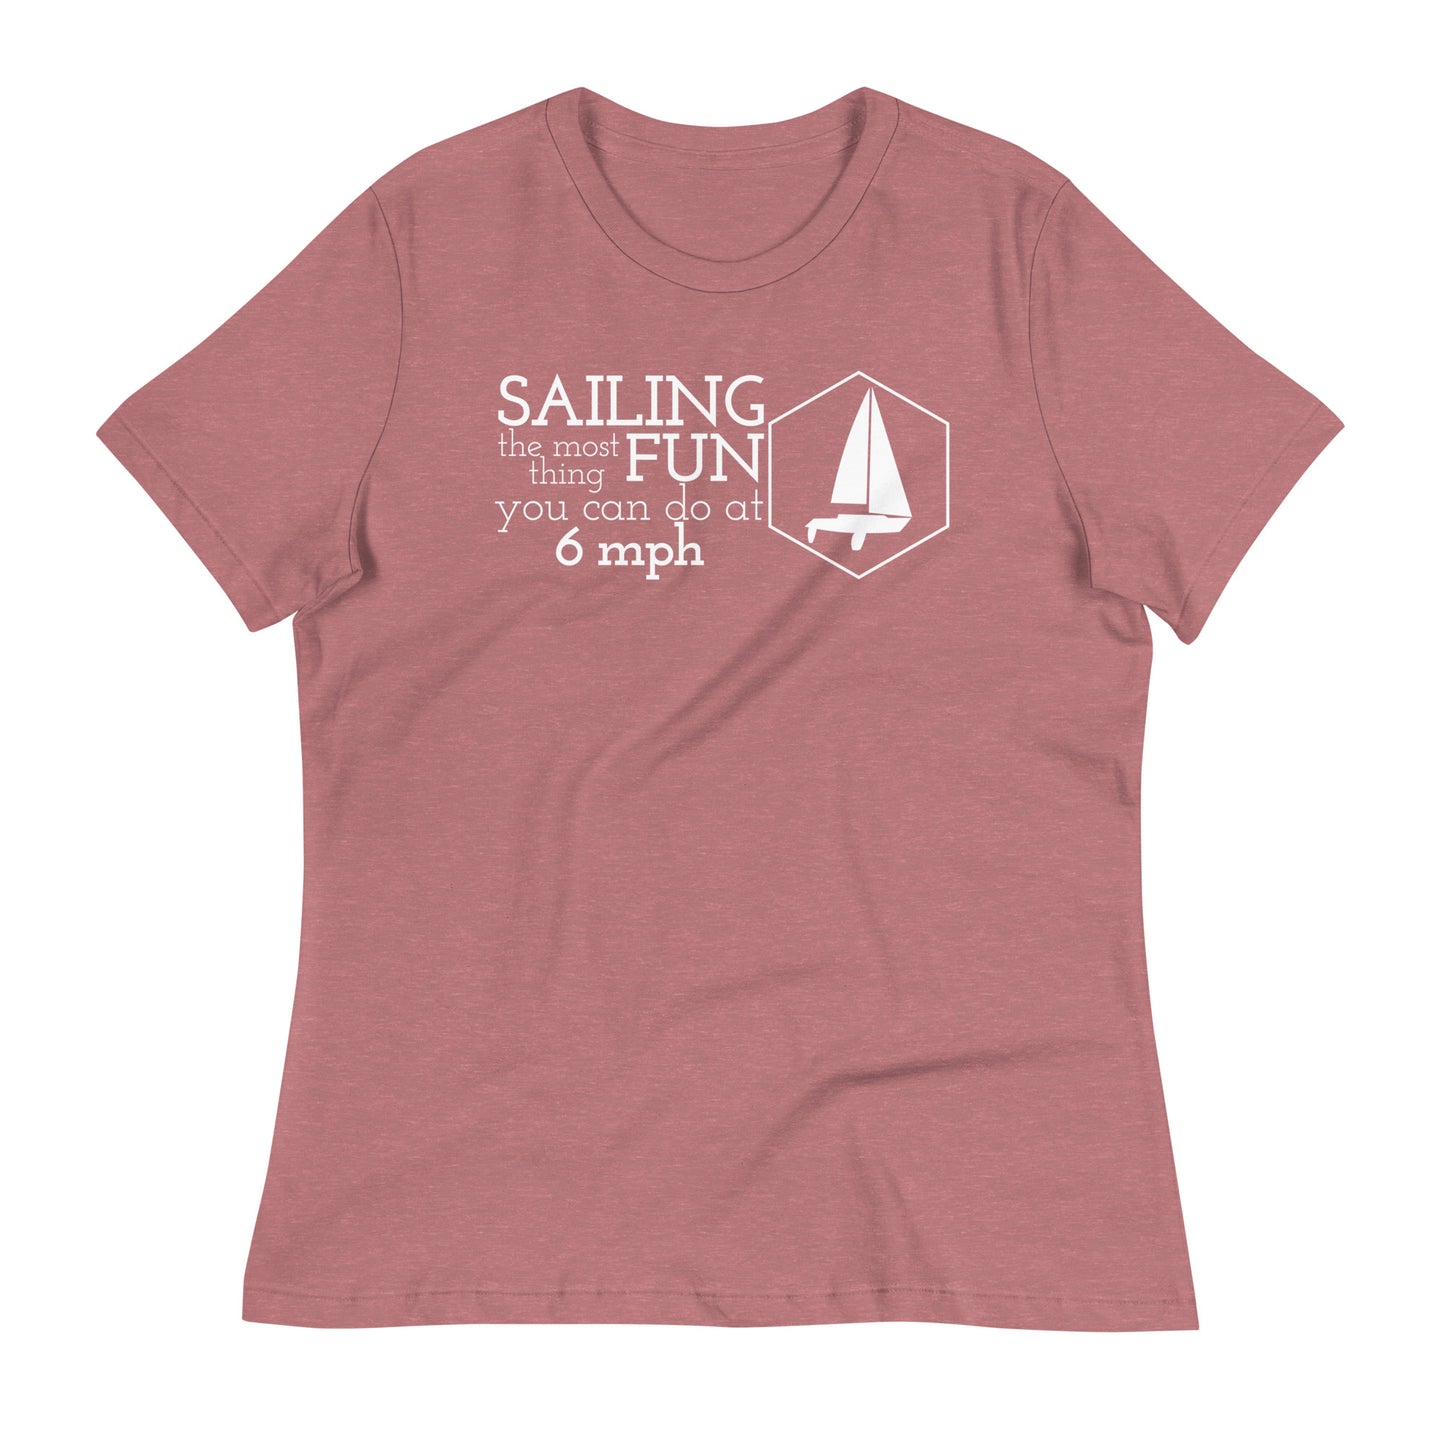 Women's Relaxed T-Shirt ( Most fun at 6 mph )